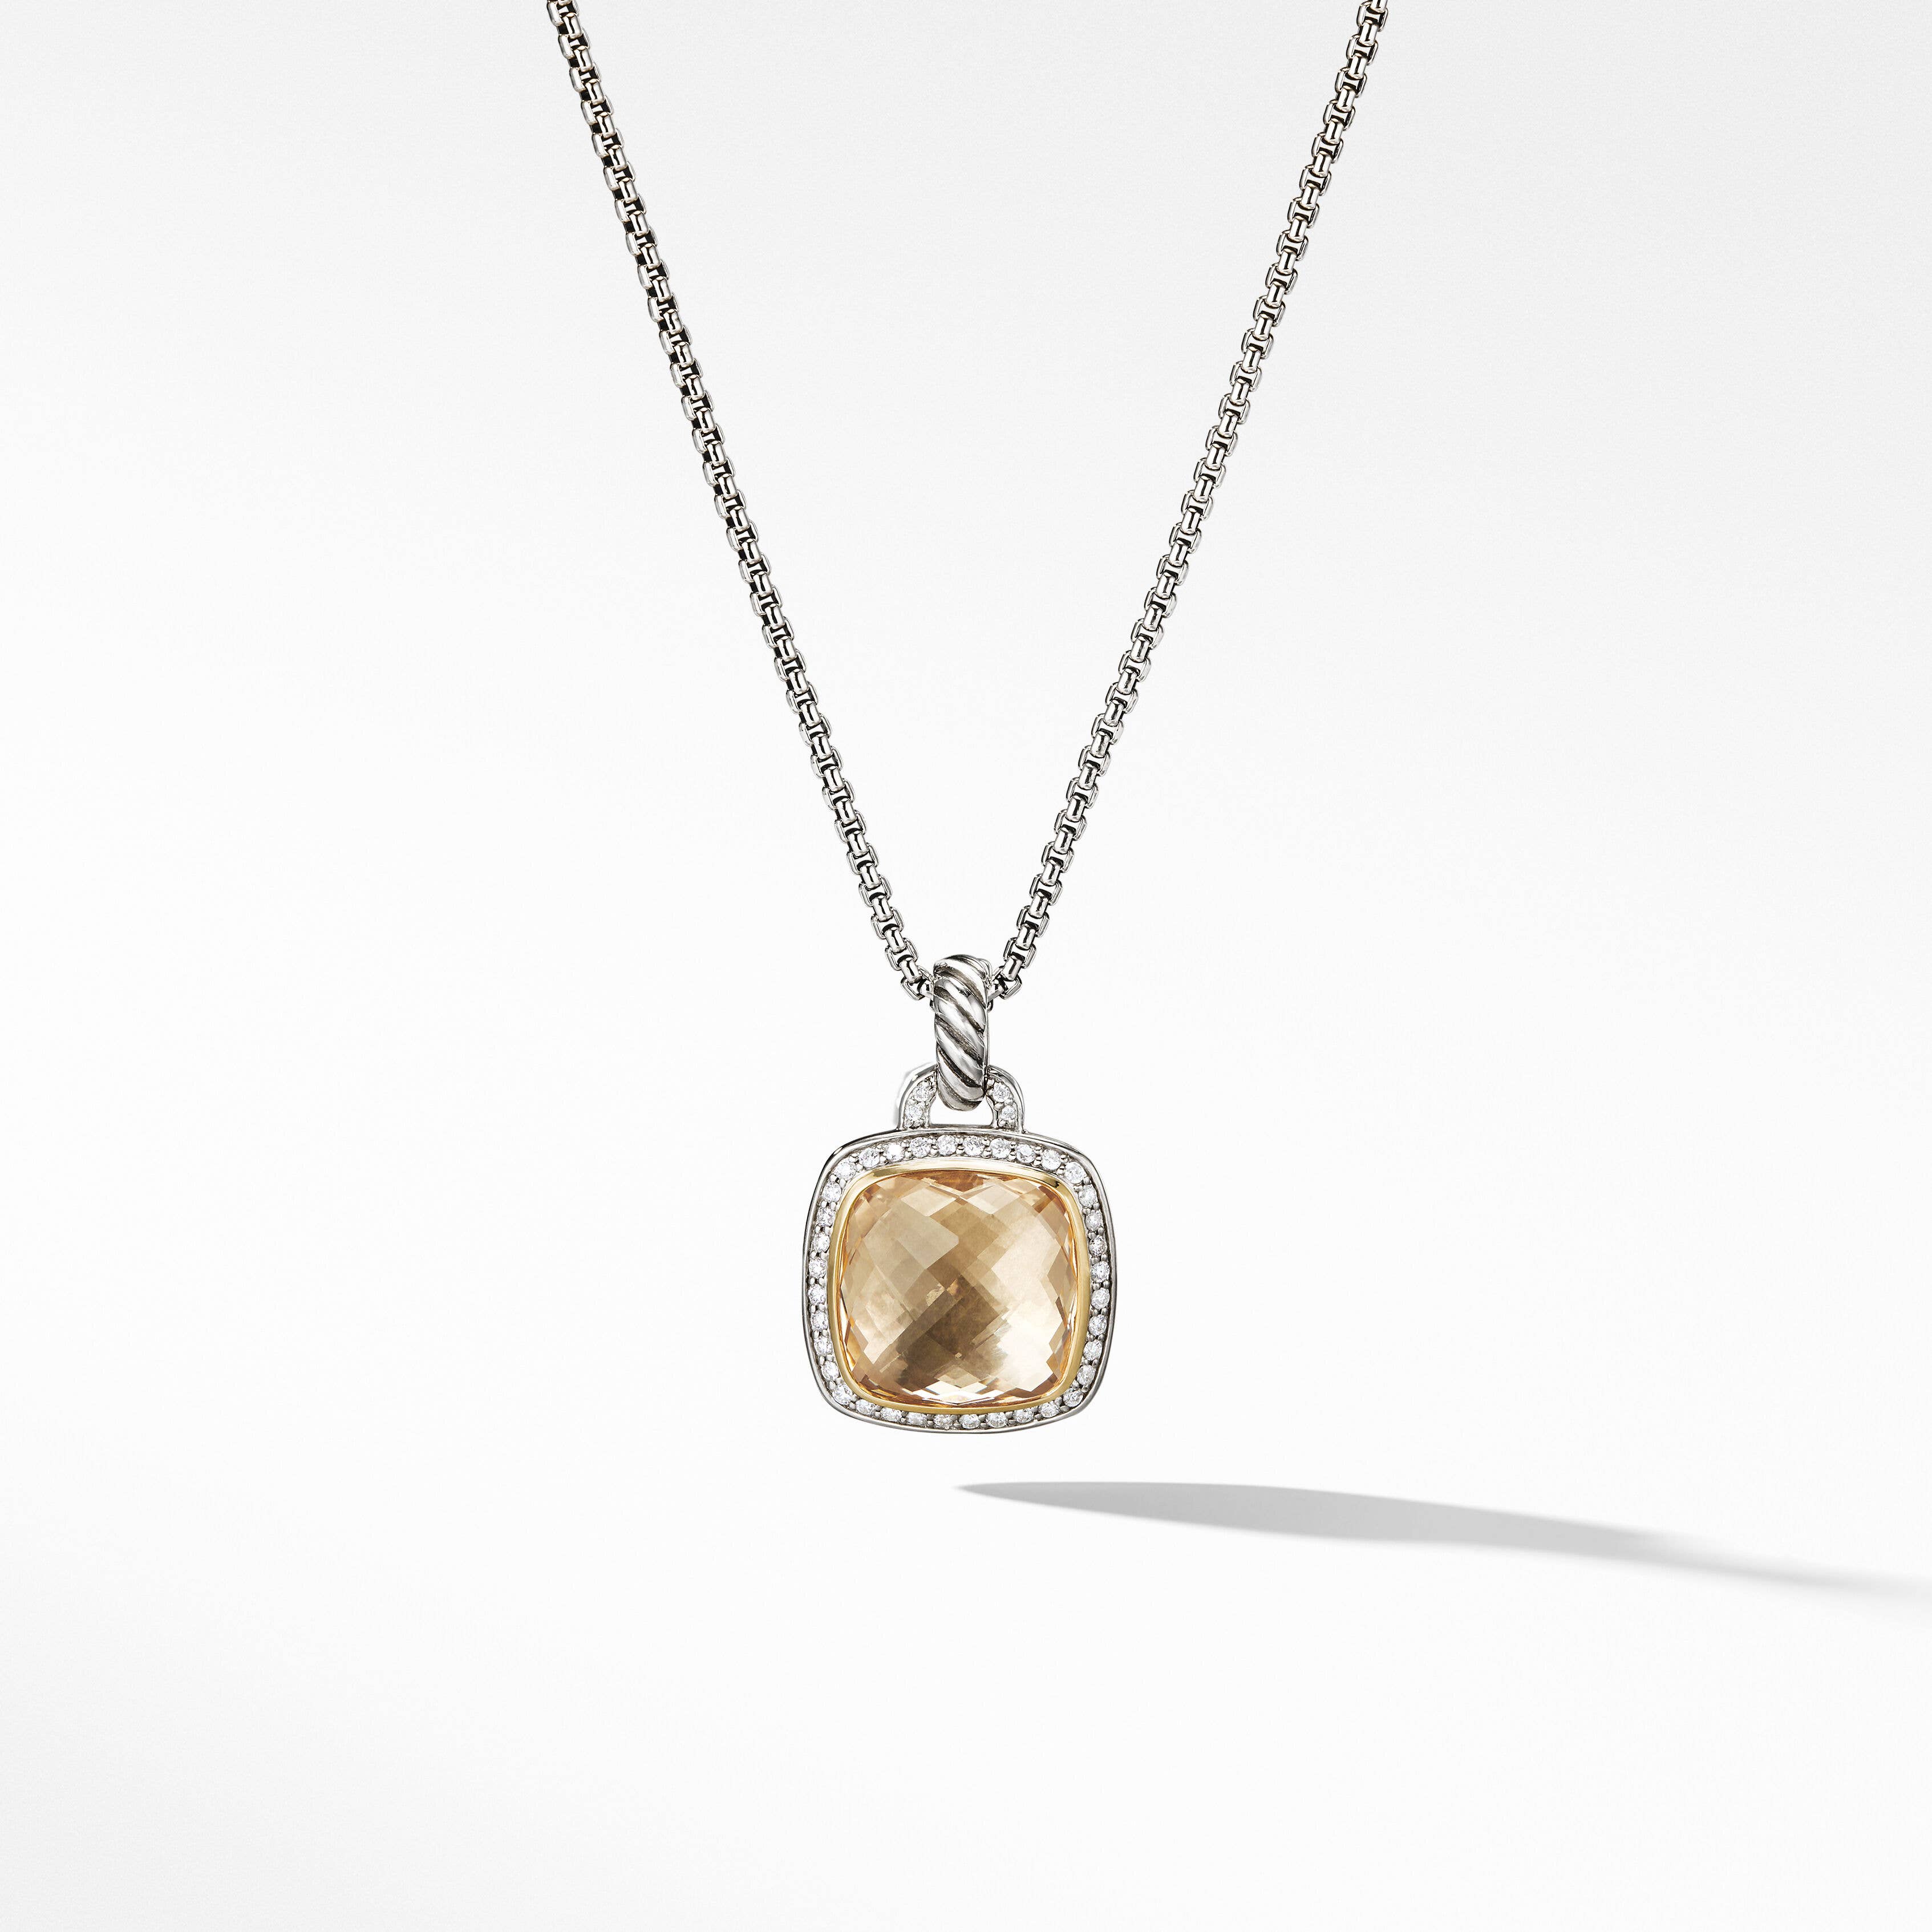 Albion® Pendant with Champagne Citrine, Pavé Diamonds and 18K Yellow Gold